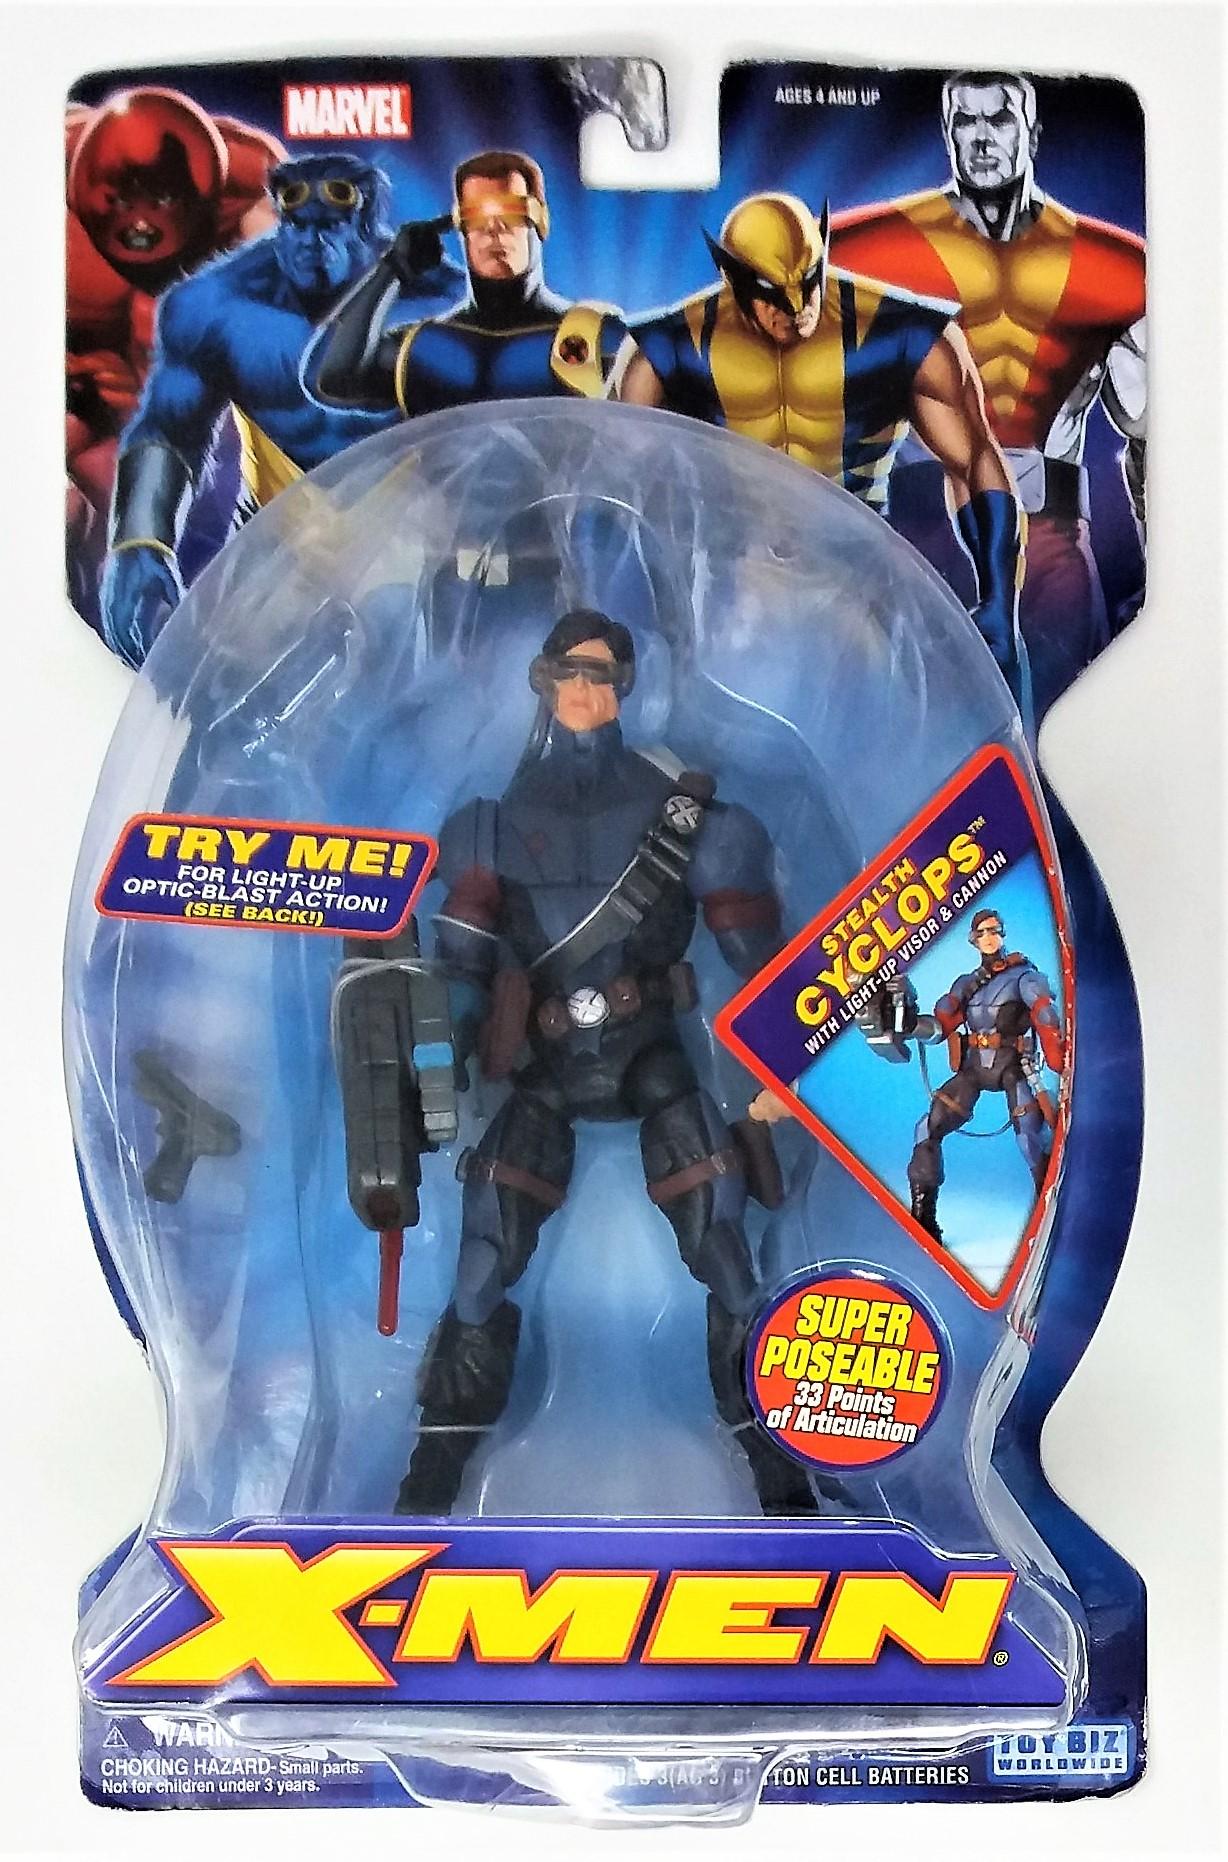 Toy Biz X-Men Stealth Cyclops Super-Articulated Action Figure Toy